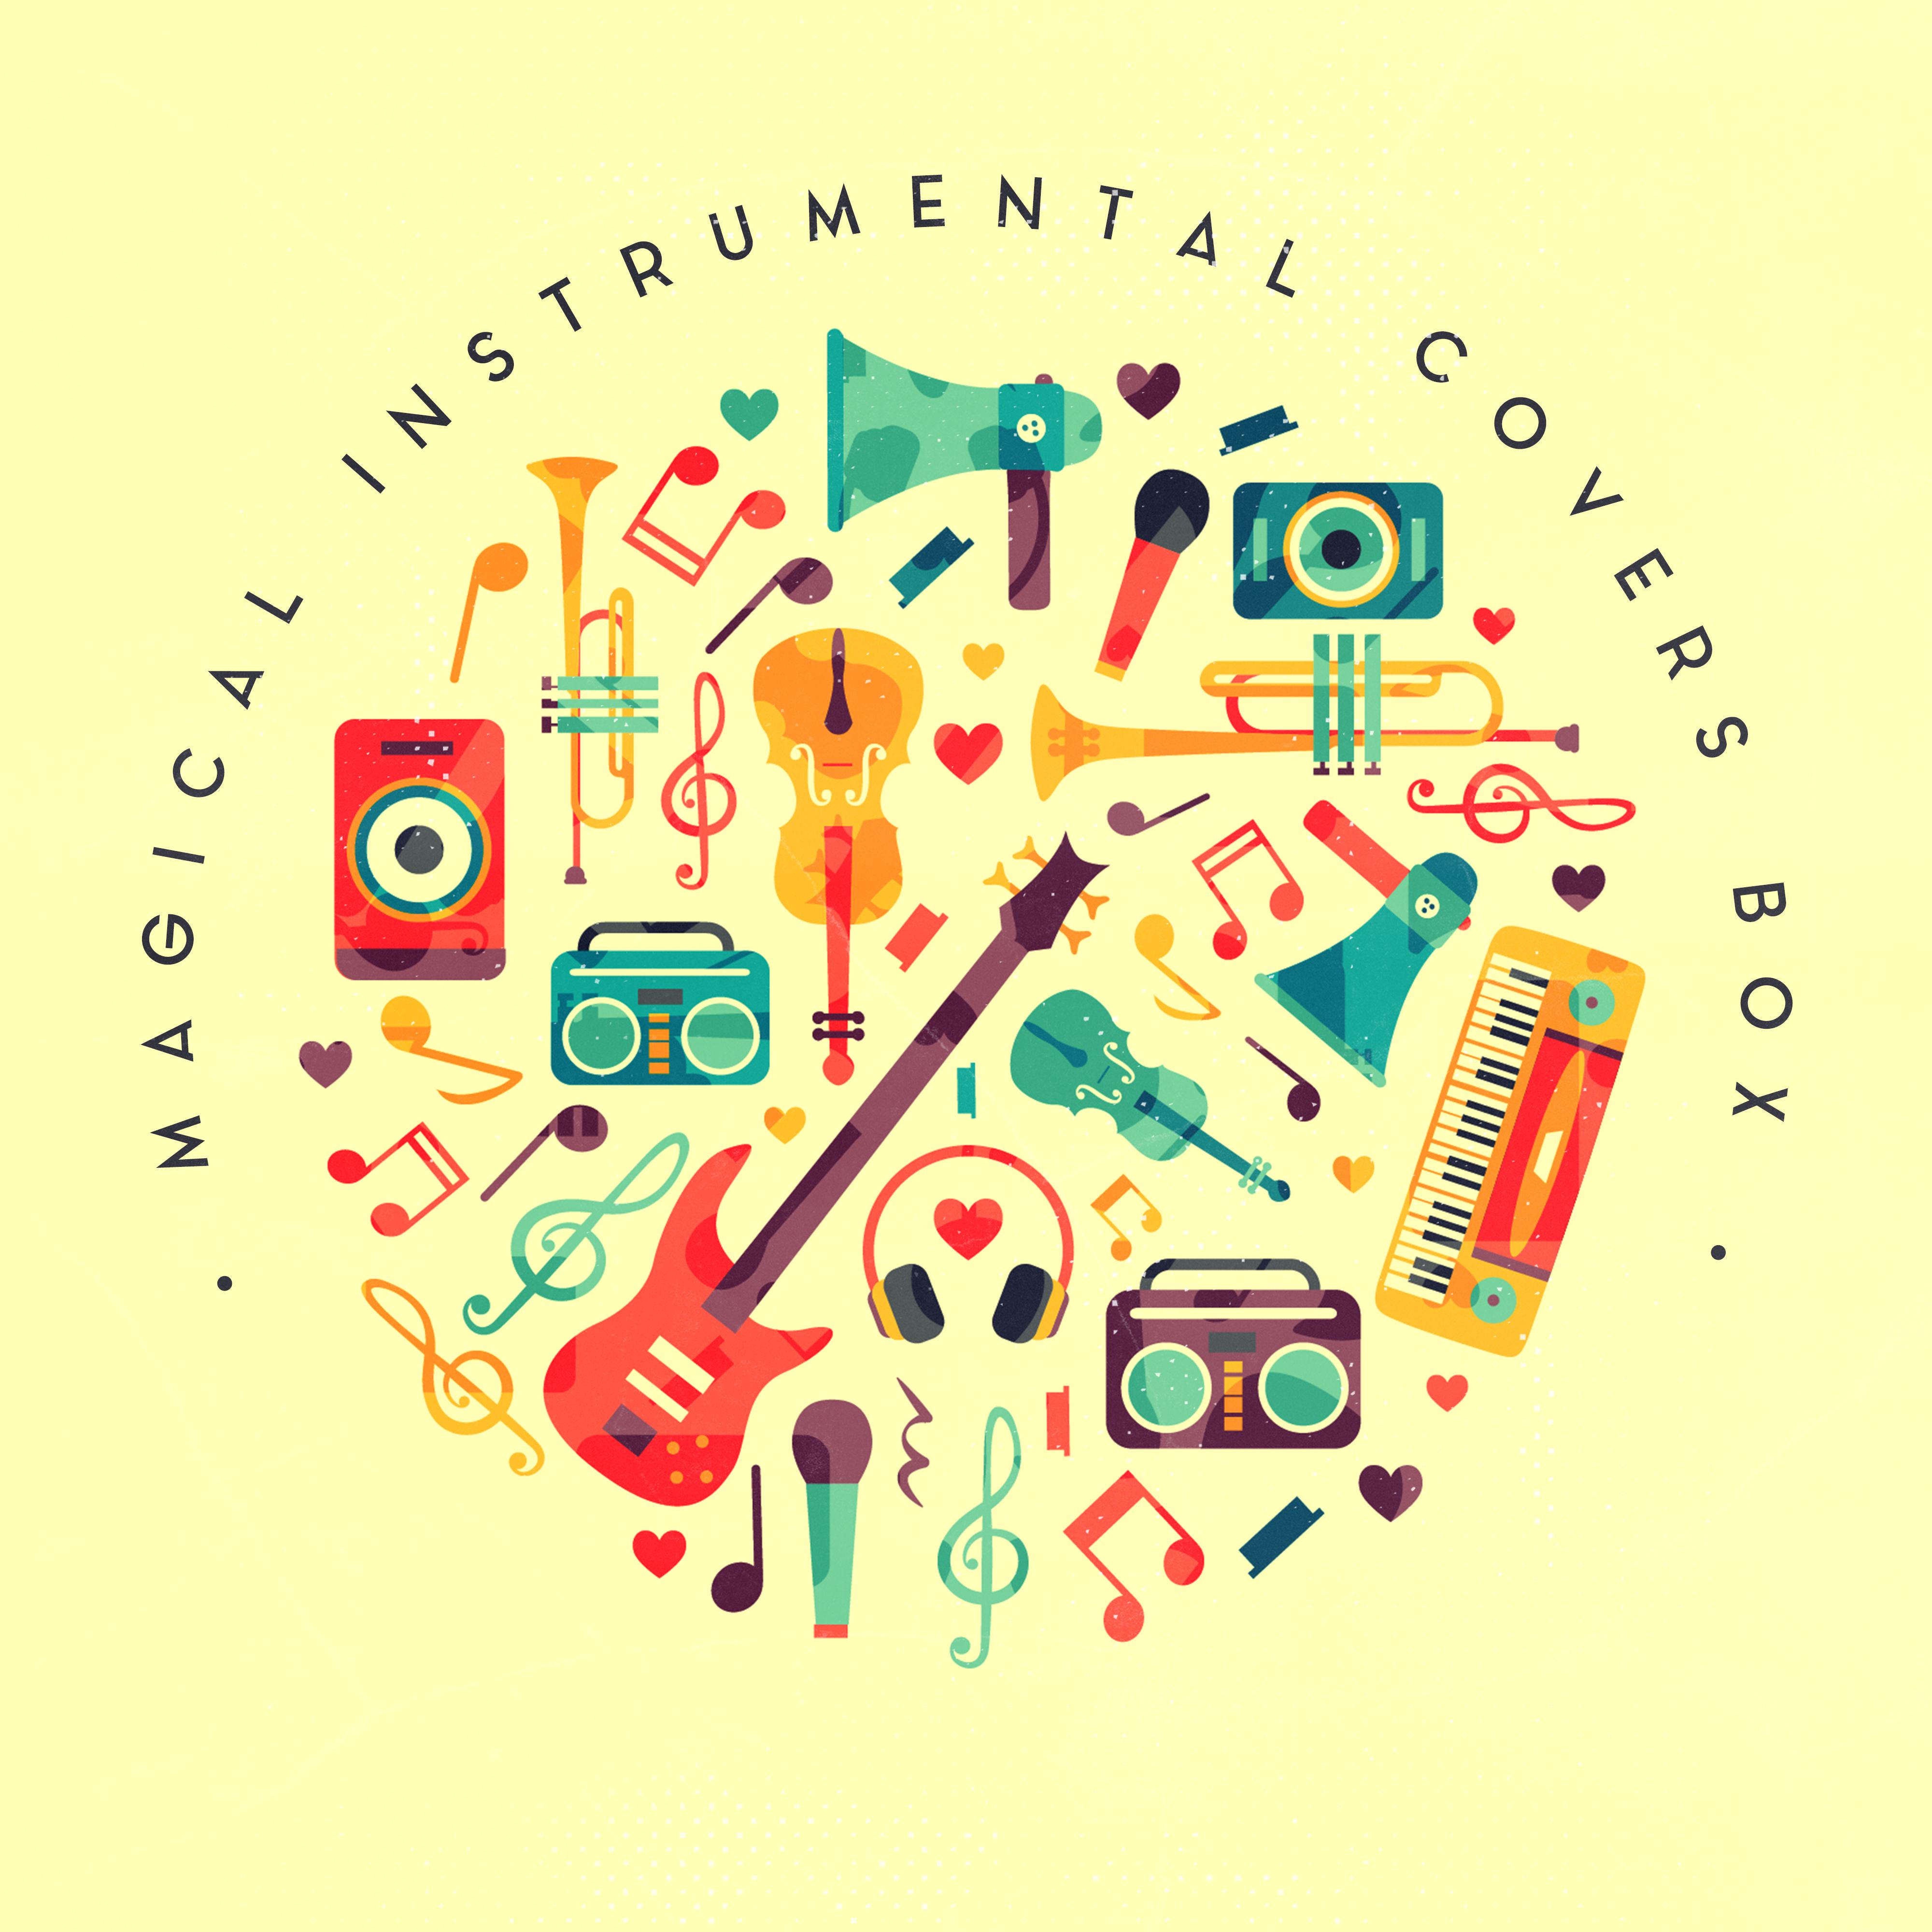 Magical Instrumental Covers Box: Compilation of 15 Instrumental 2019 Covers of Very Popular Songs from Pop to Classical Music, Melodies Played on the Violin, Piano & Guitar